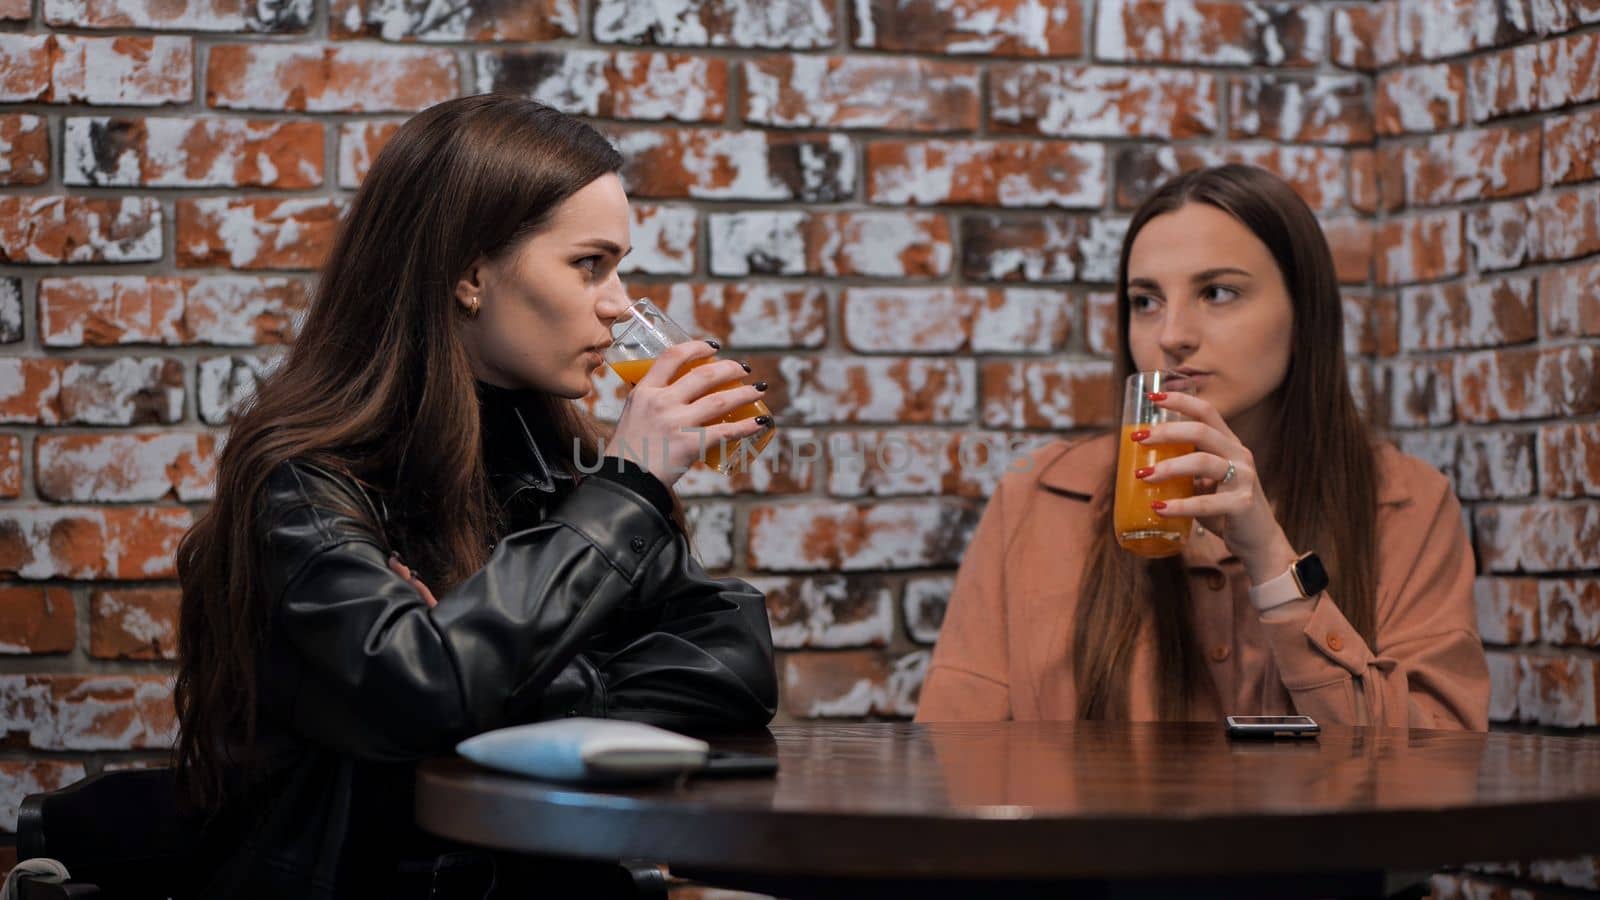 Two brown-haired girls talk in a cafe over glasses of juice